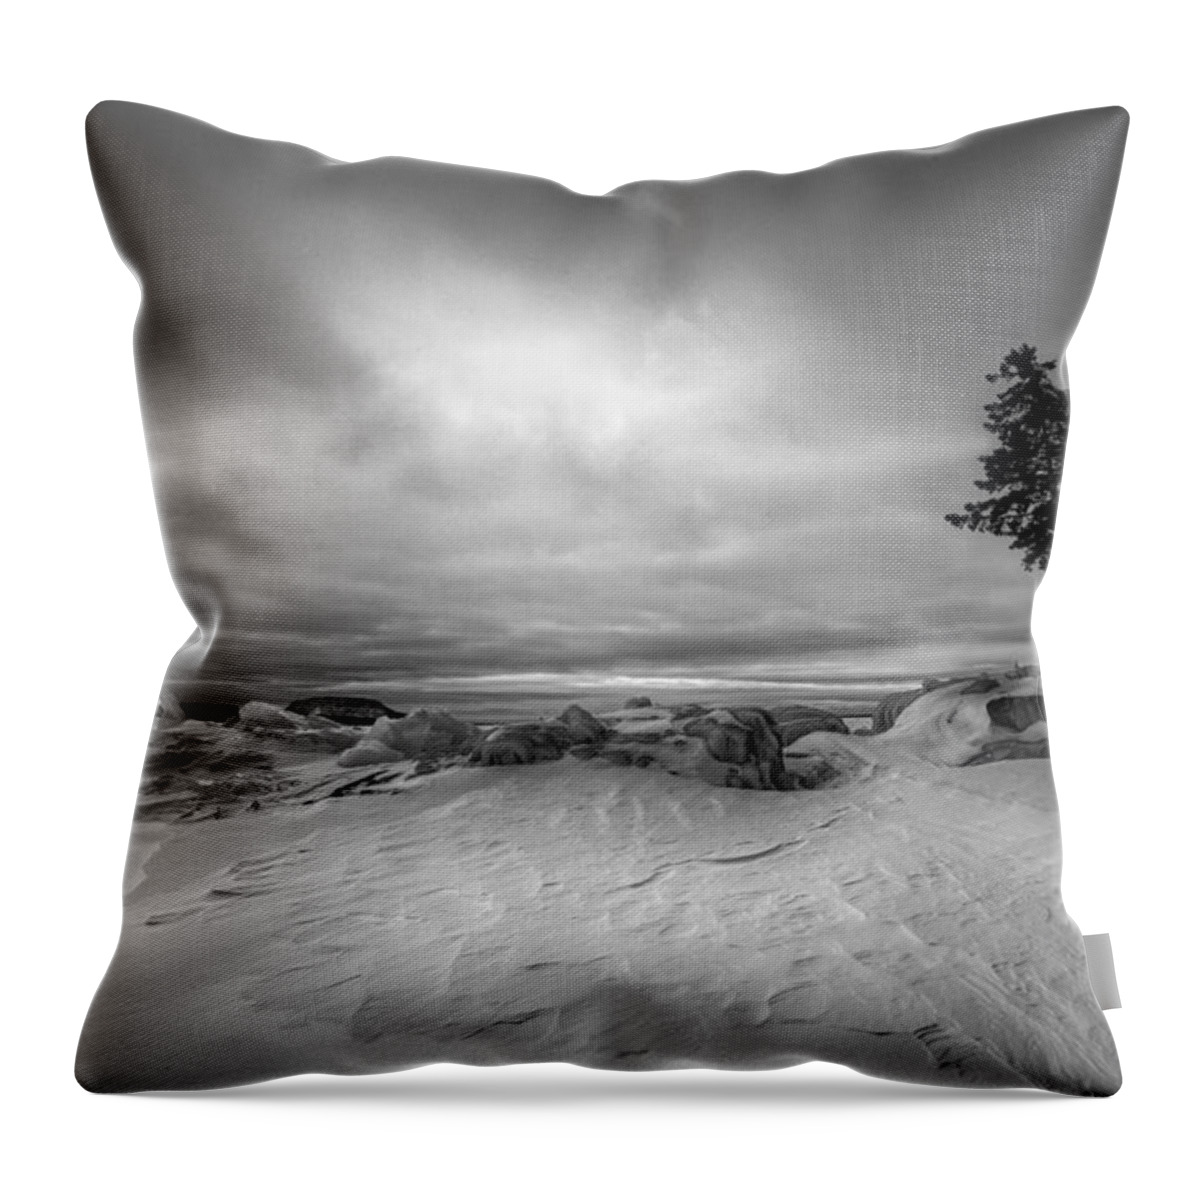 Aboriginal Throw Pillow featuring the photograph The Point by Jakub Sisak